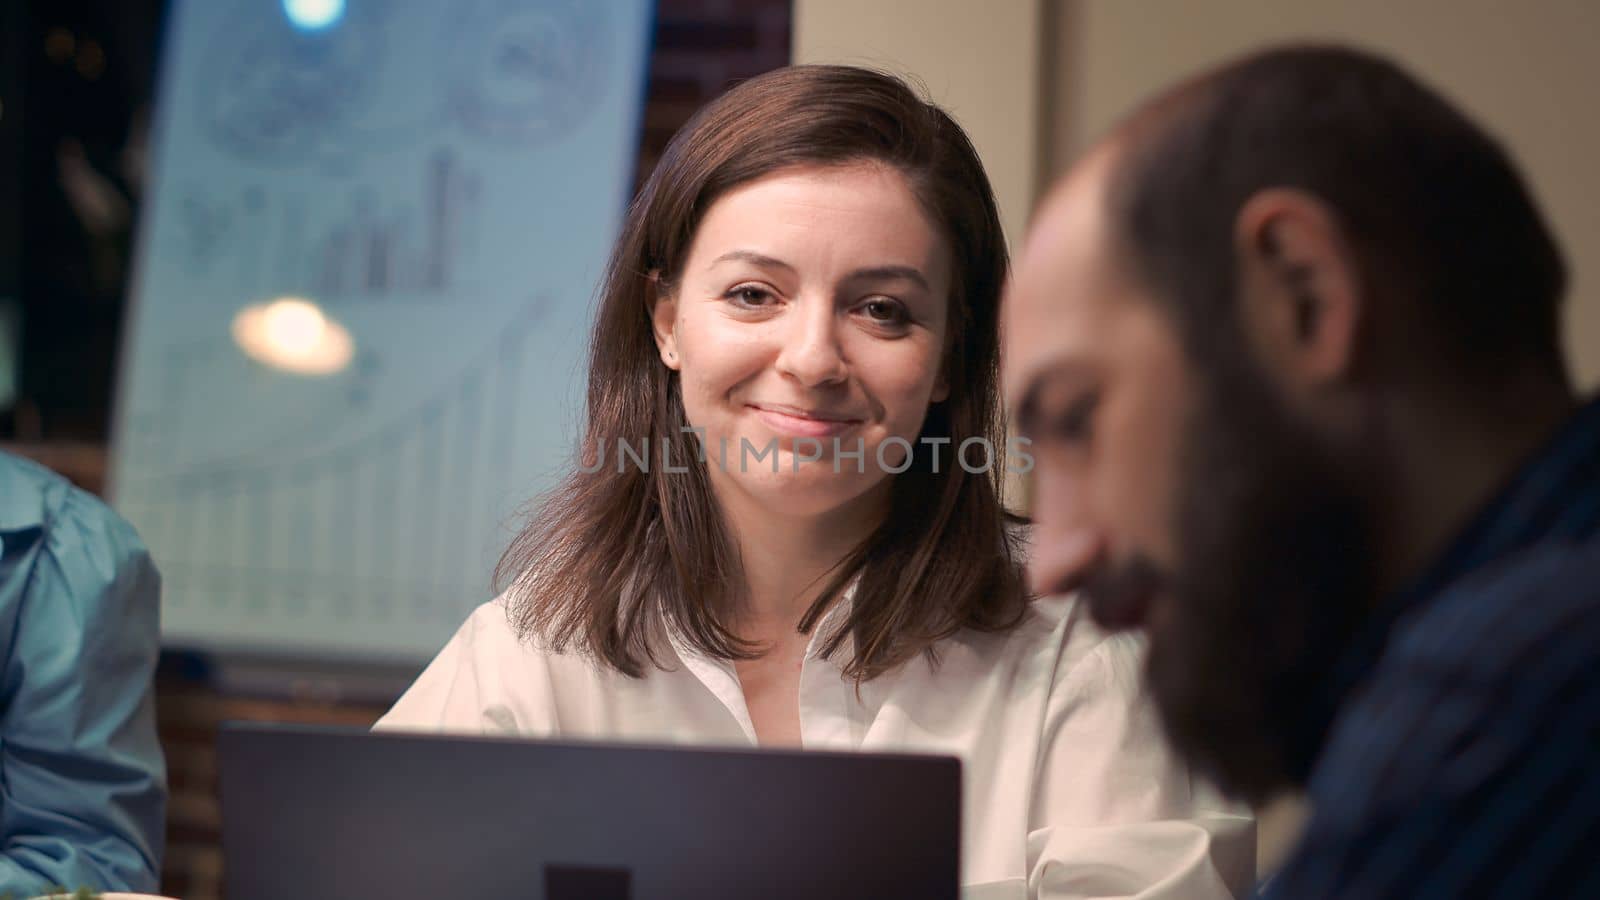 Woman talking with employee in business meeting, smiling portrait by DCStudio